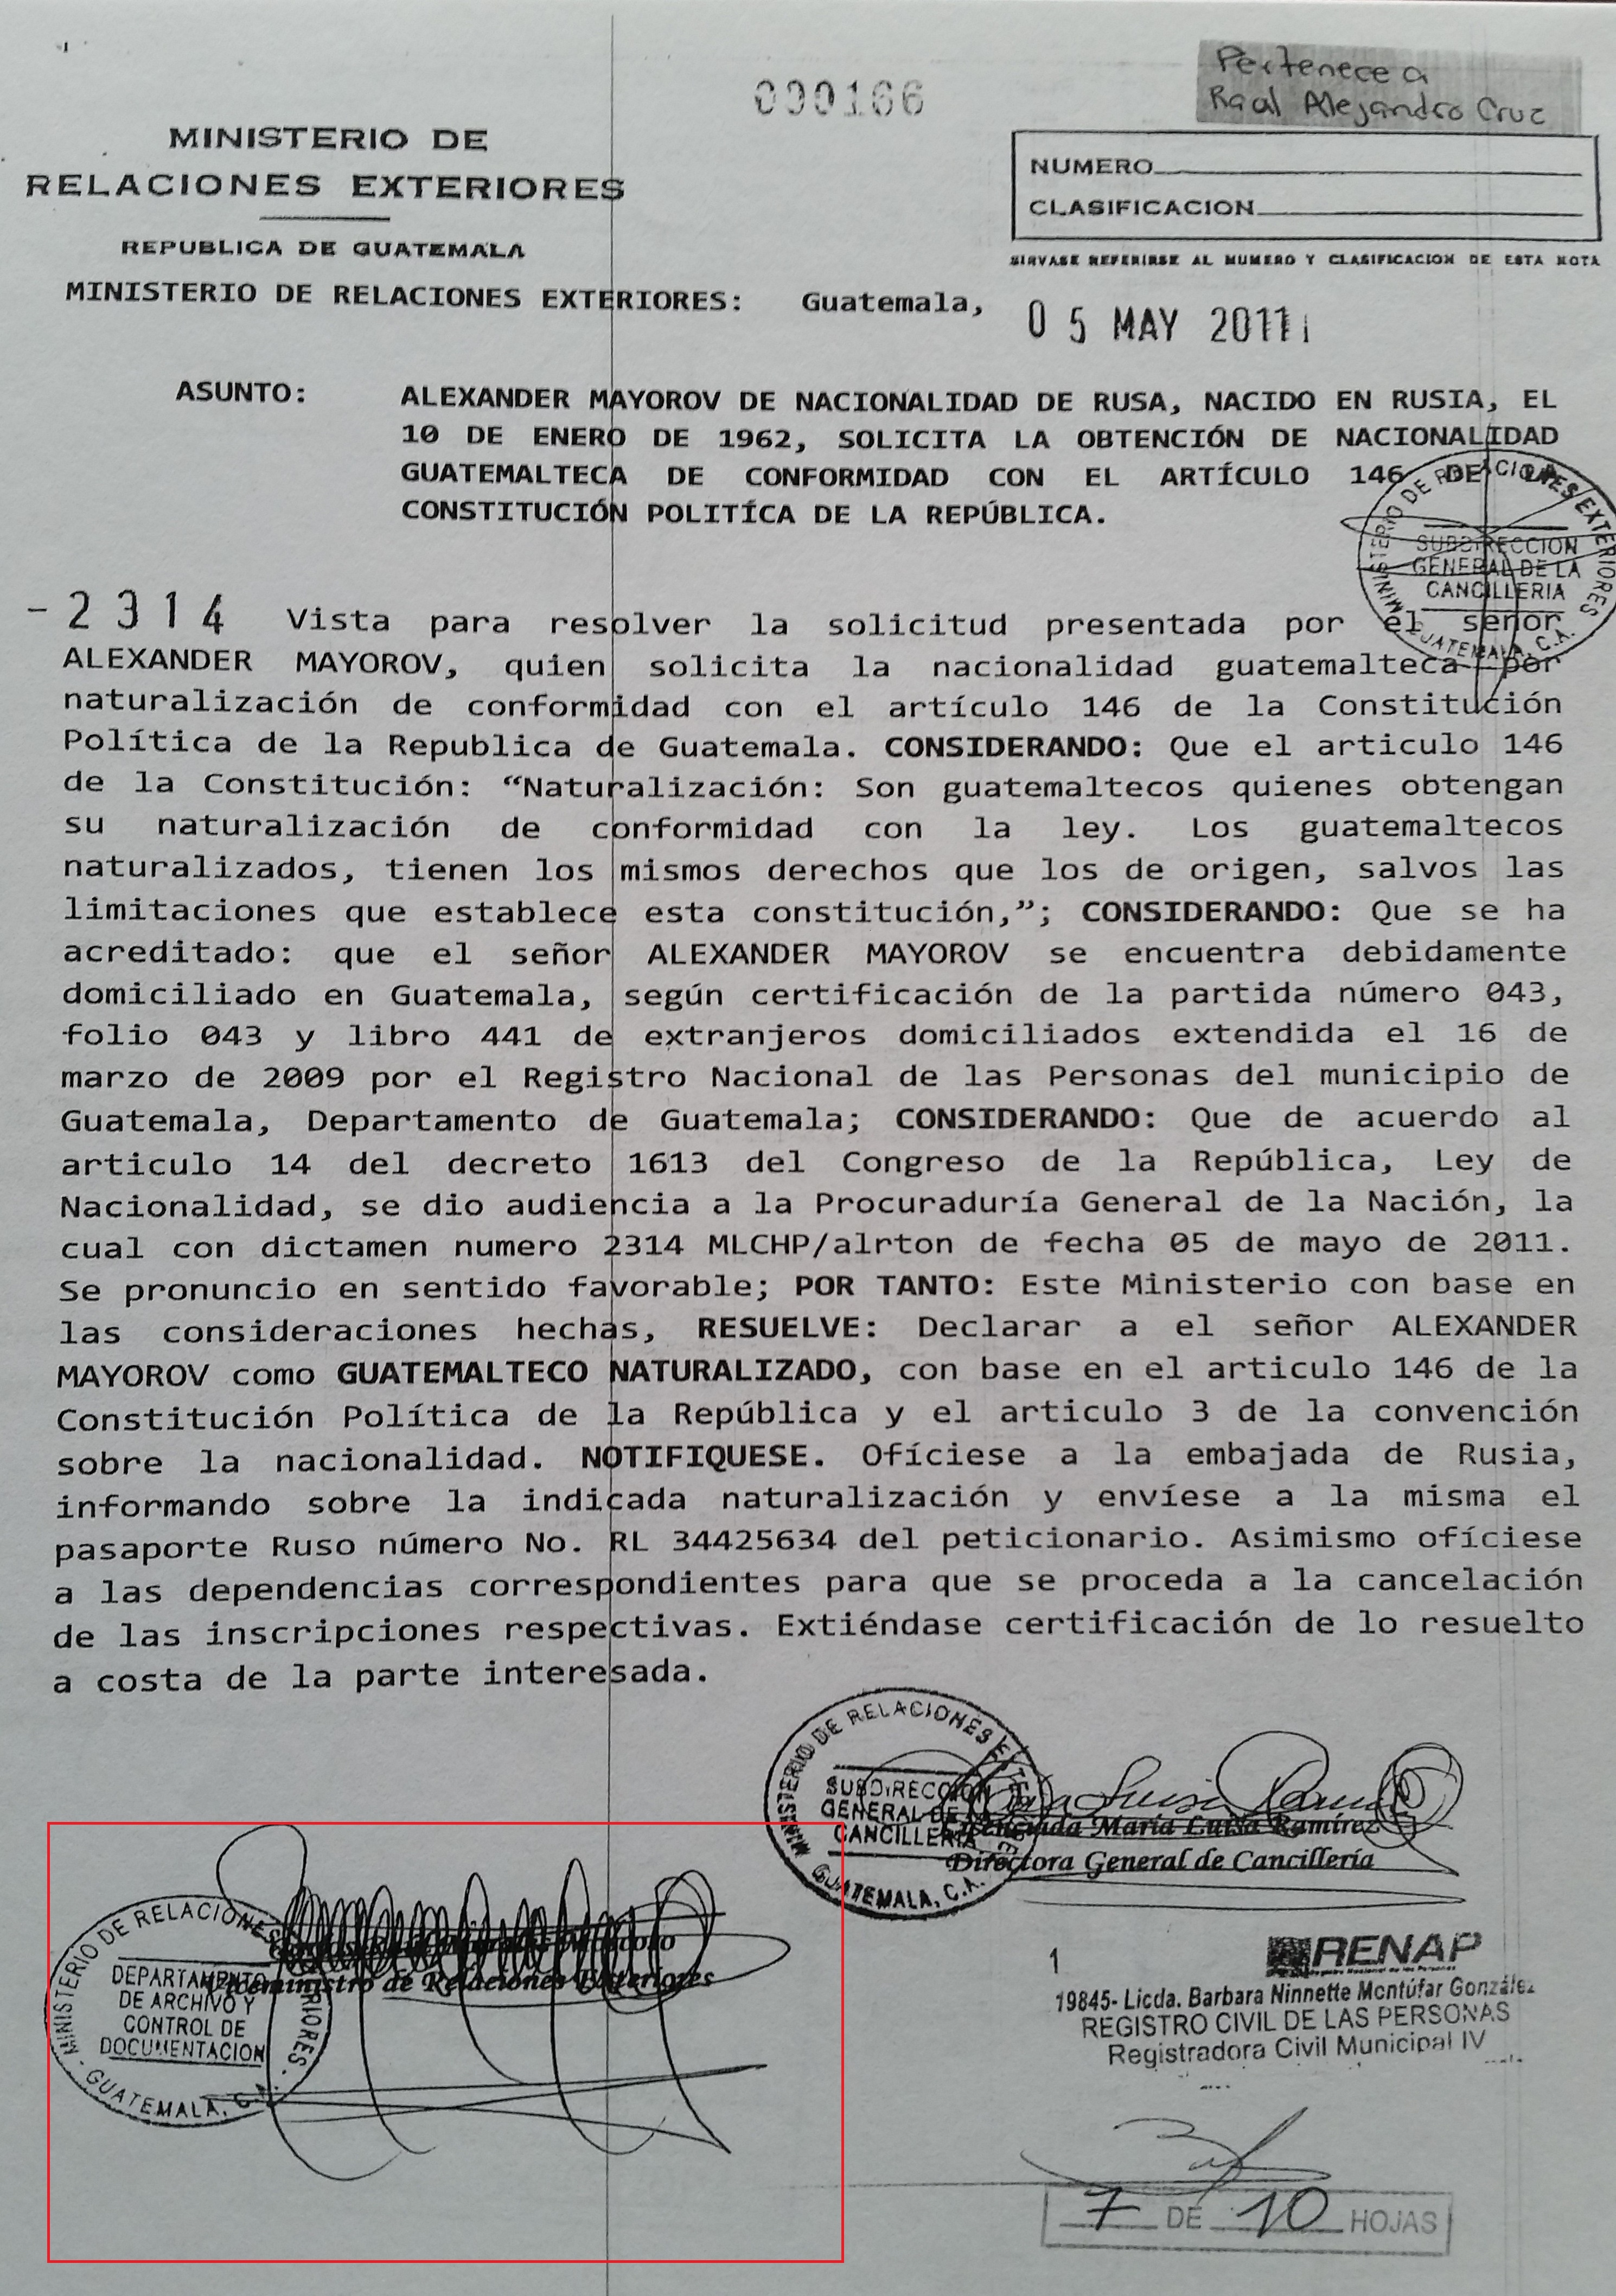 False naturalization of Alexander Mayorov, Russia, signed by Raul Morales